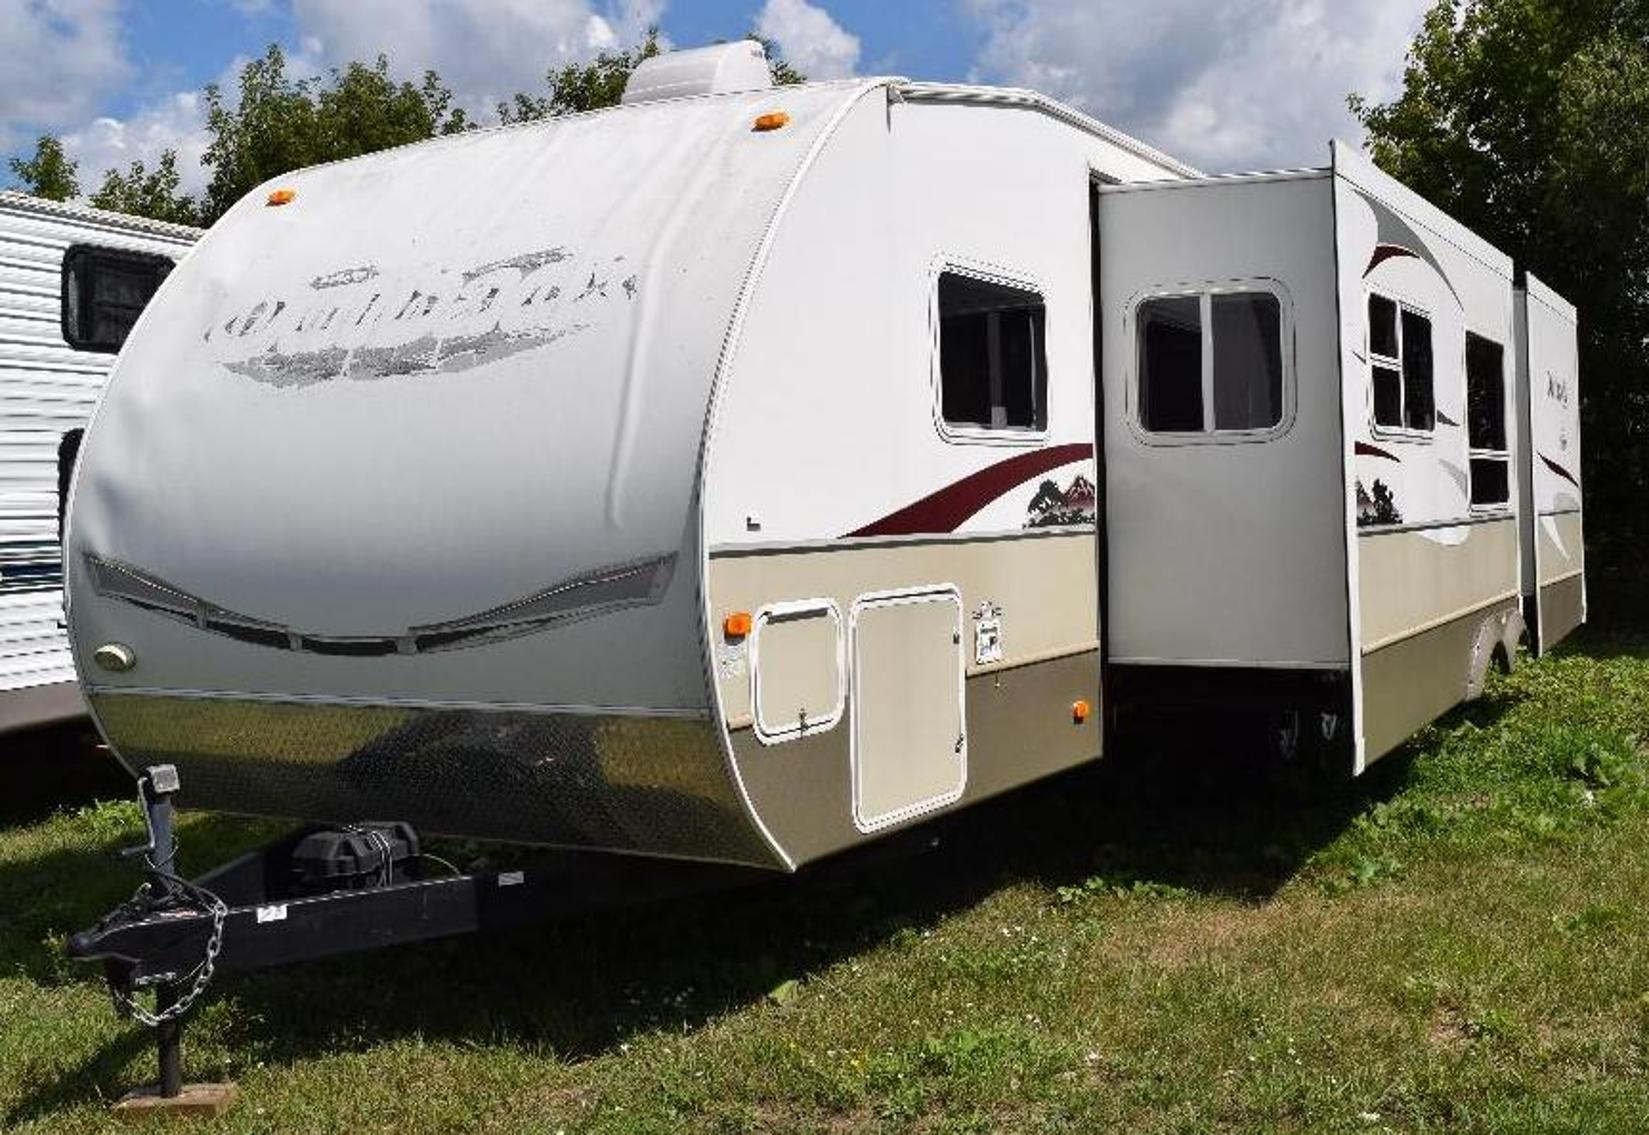 Motorhomes, Travel Trailers and 5th Wheel Campers